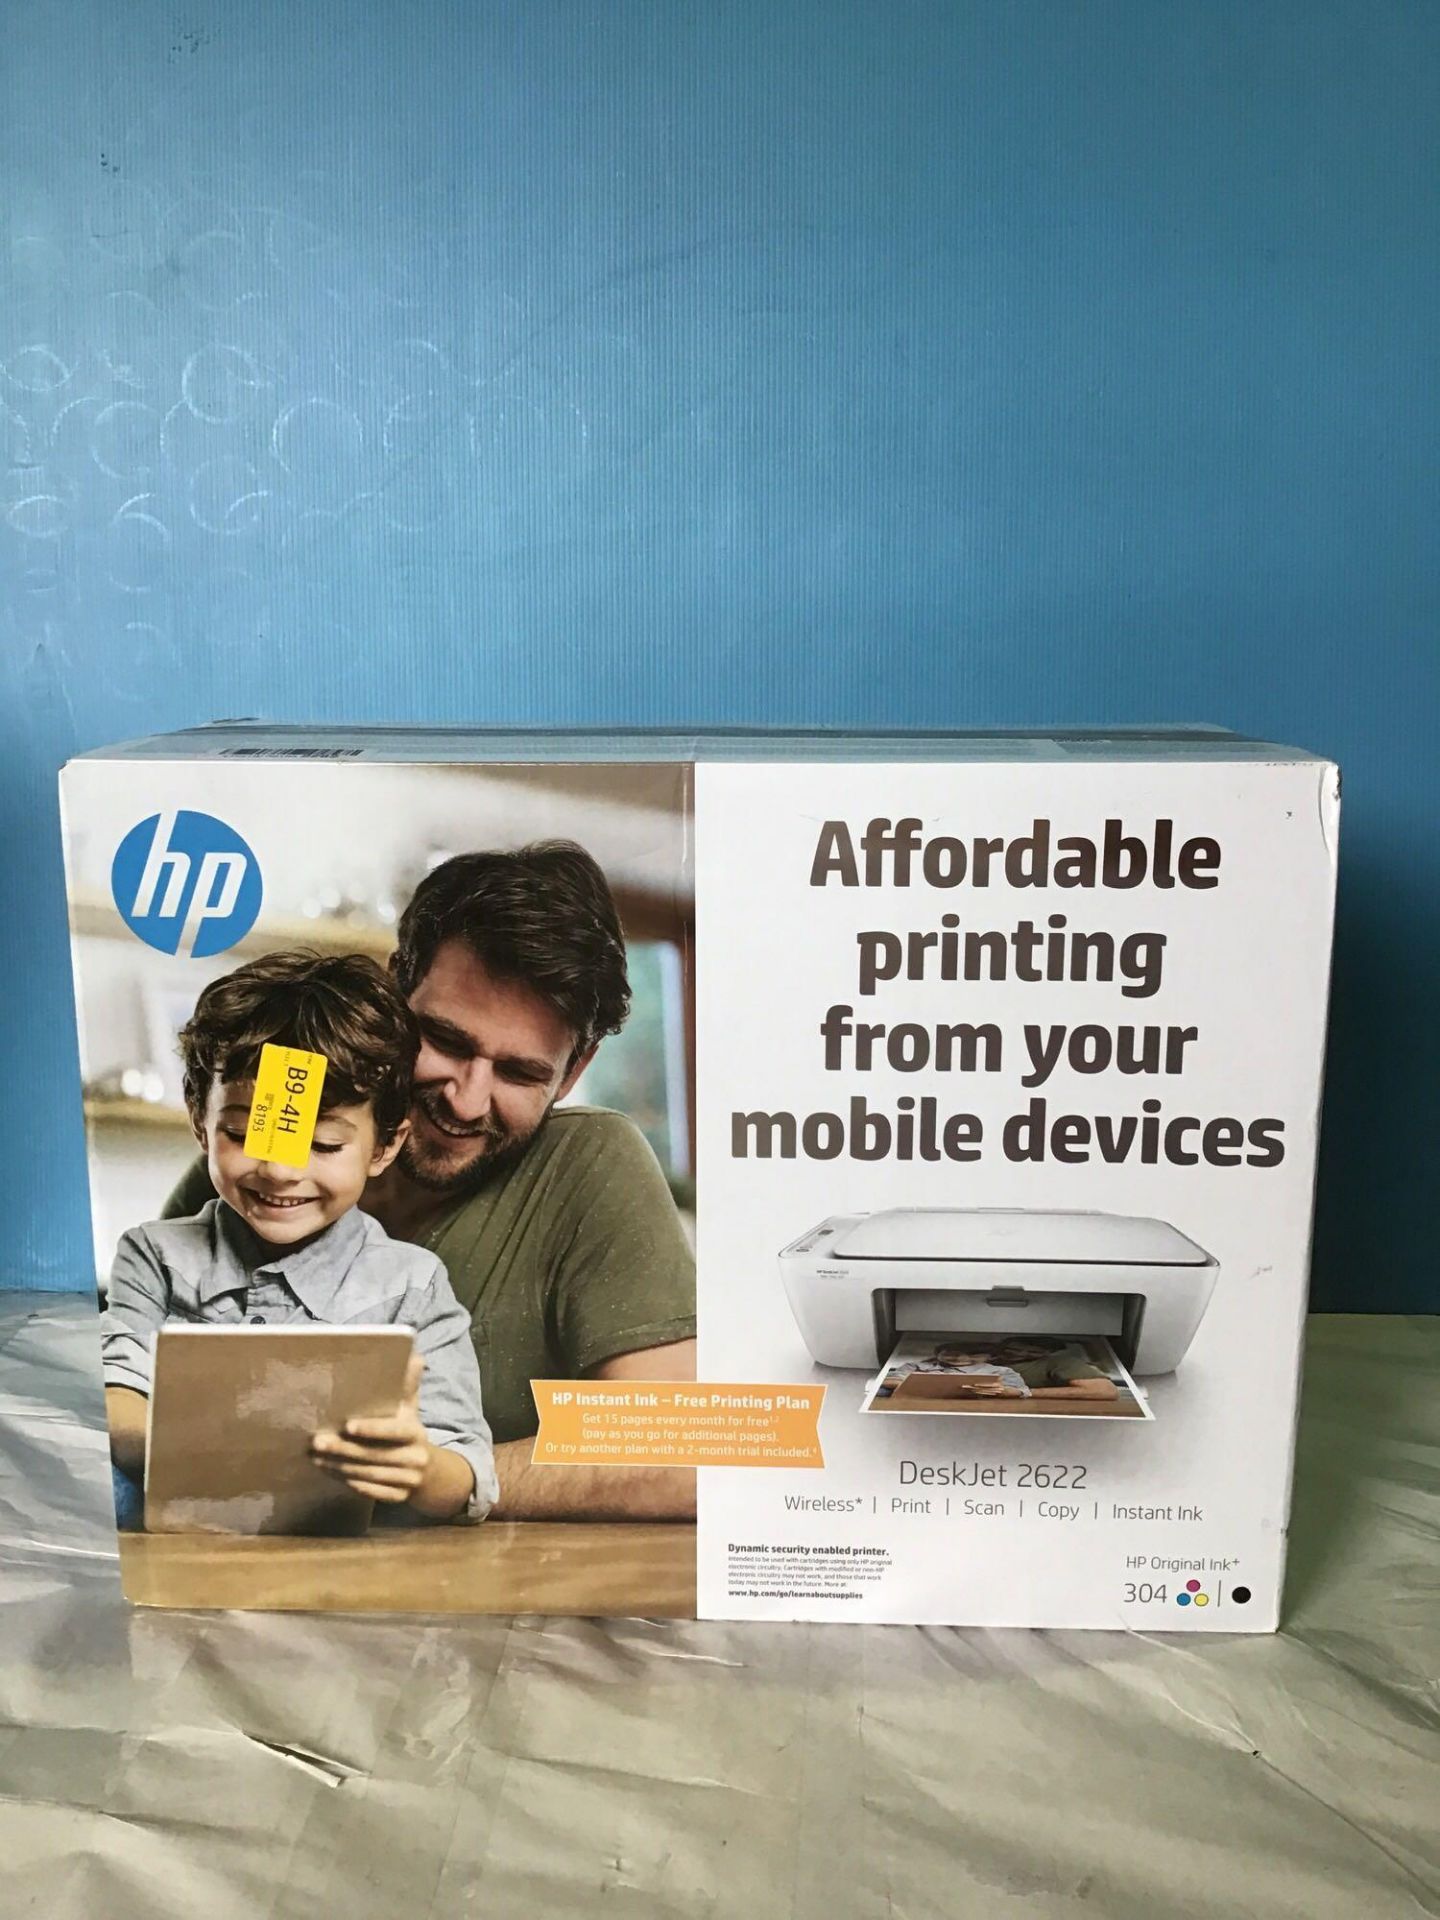 HP Deskjet 2622 All-in-One Printer, Instant Ink £34.99 RRP - Image 3 of 5